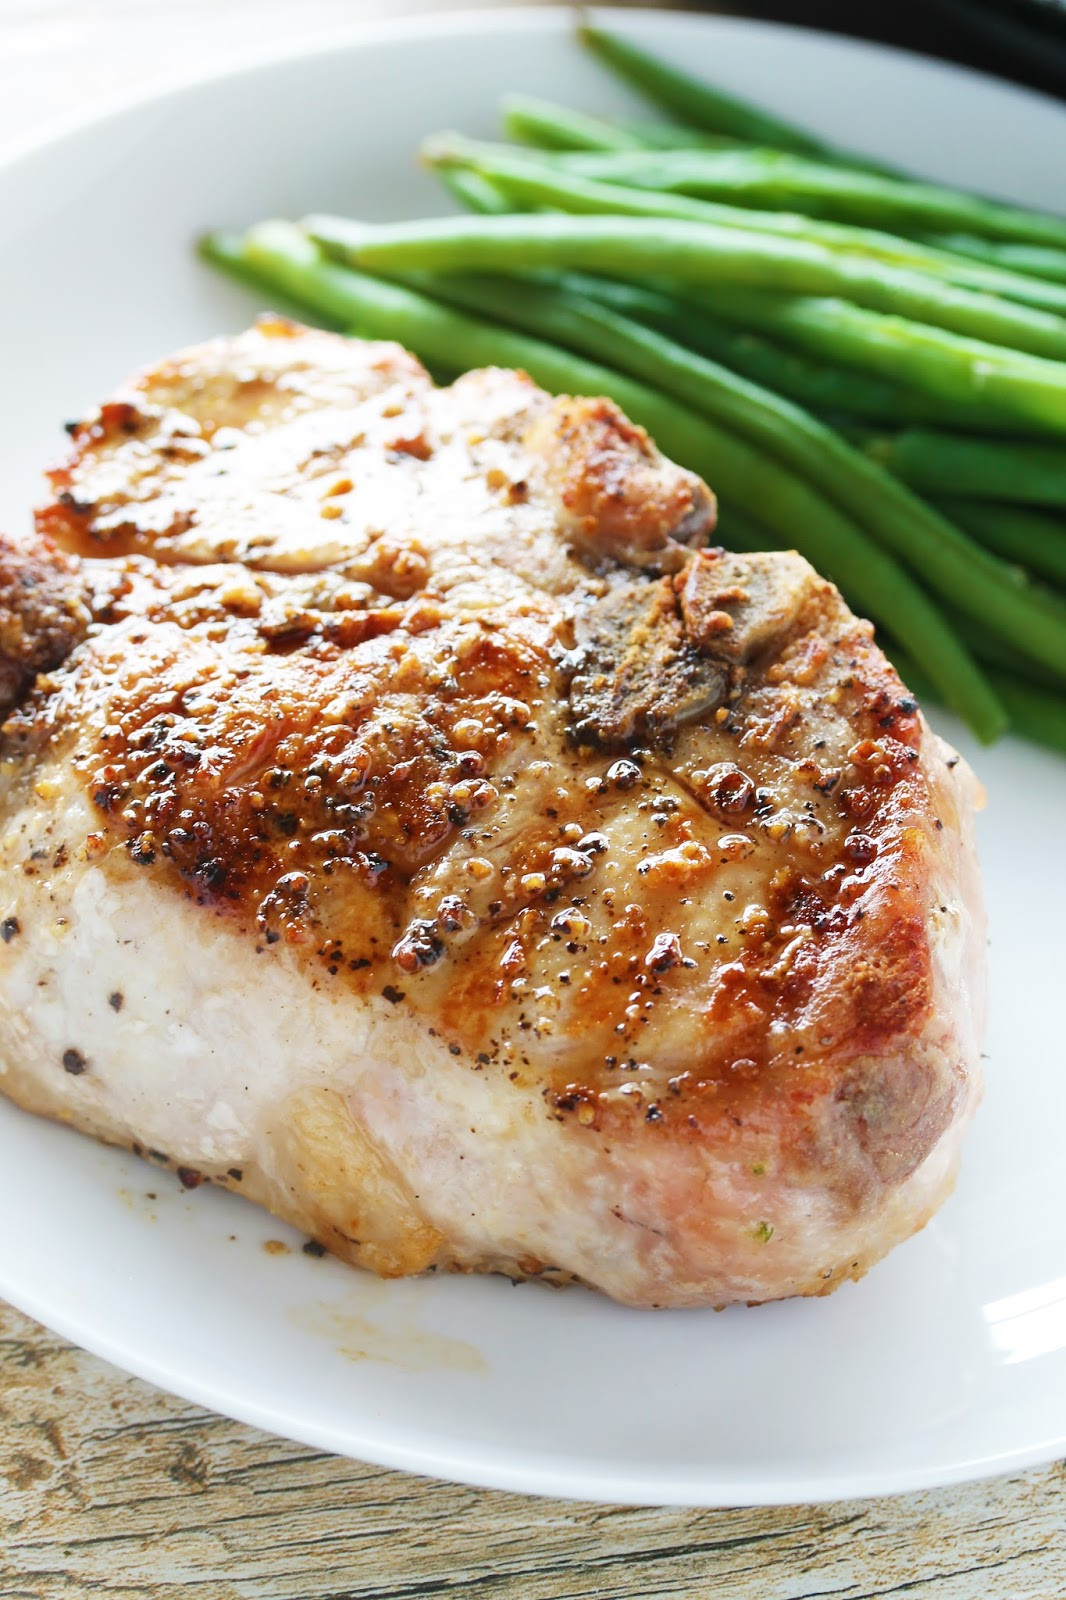 Thick Cut Pork Chops Grill
 The Stay At Home Chef Perfect Thick Cut Pork Chops